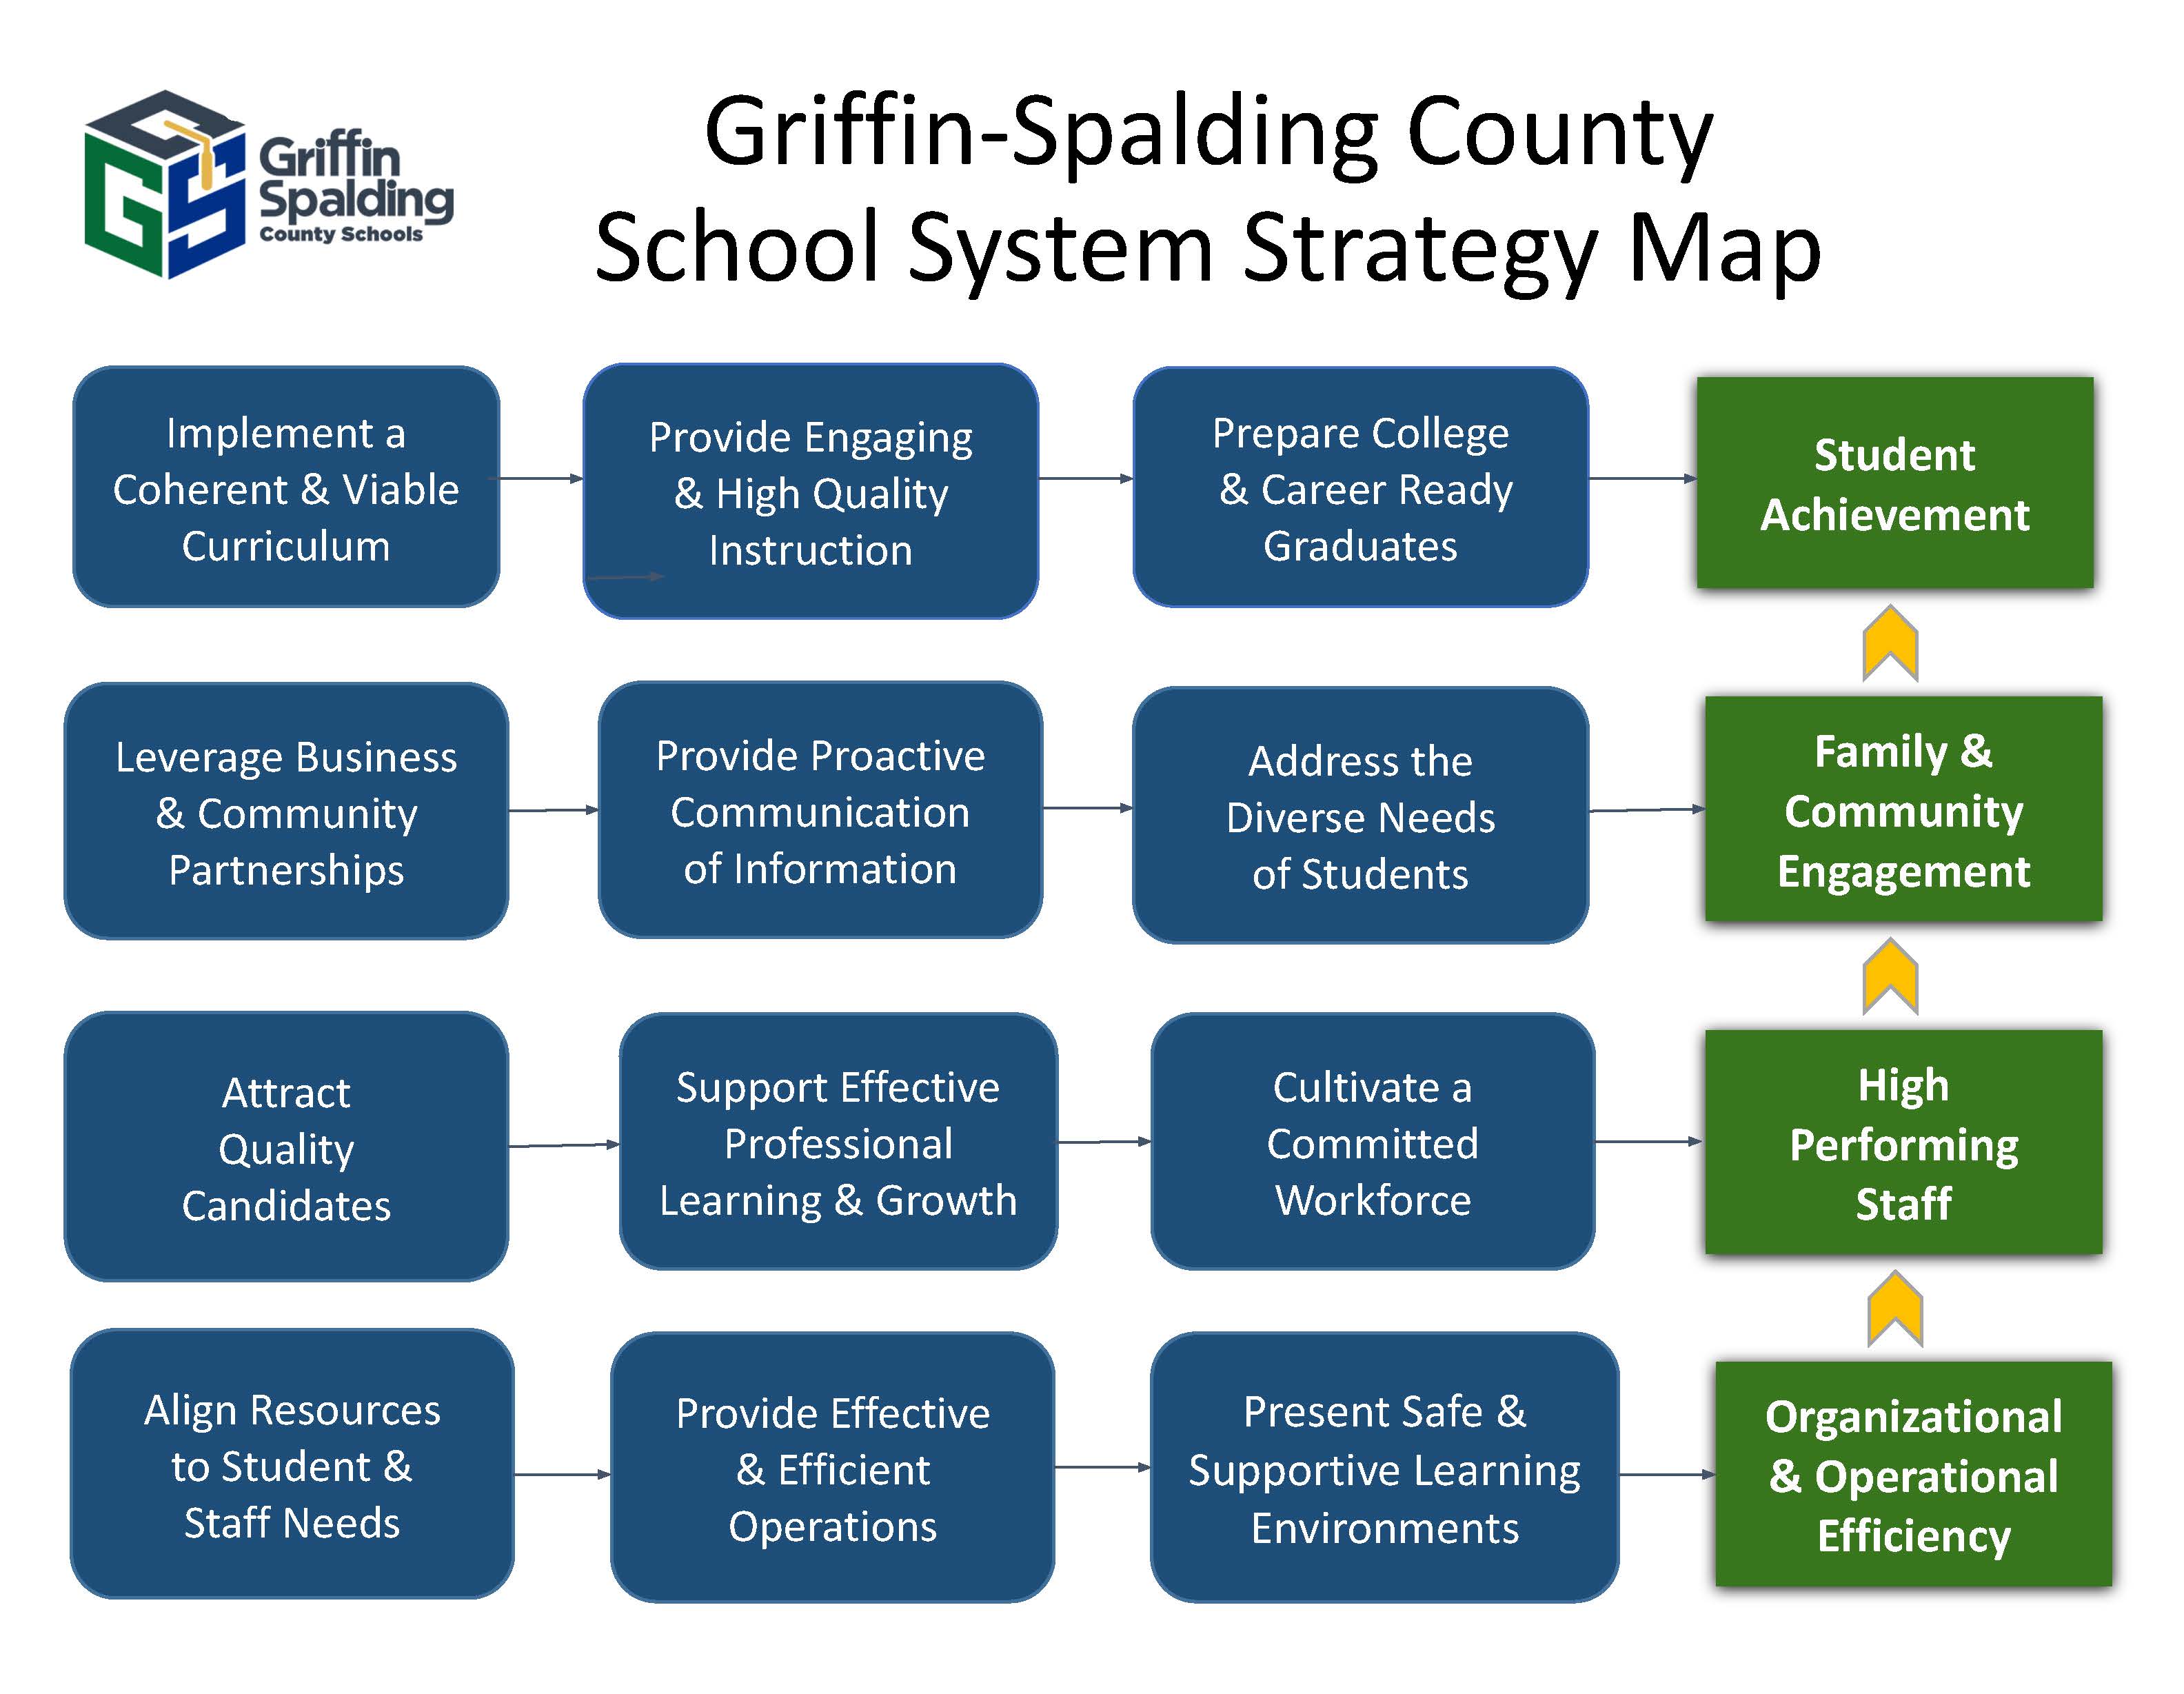 Griffin-Spalding County School System Strategy Map